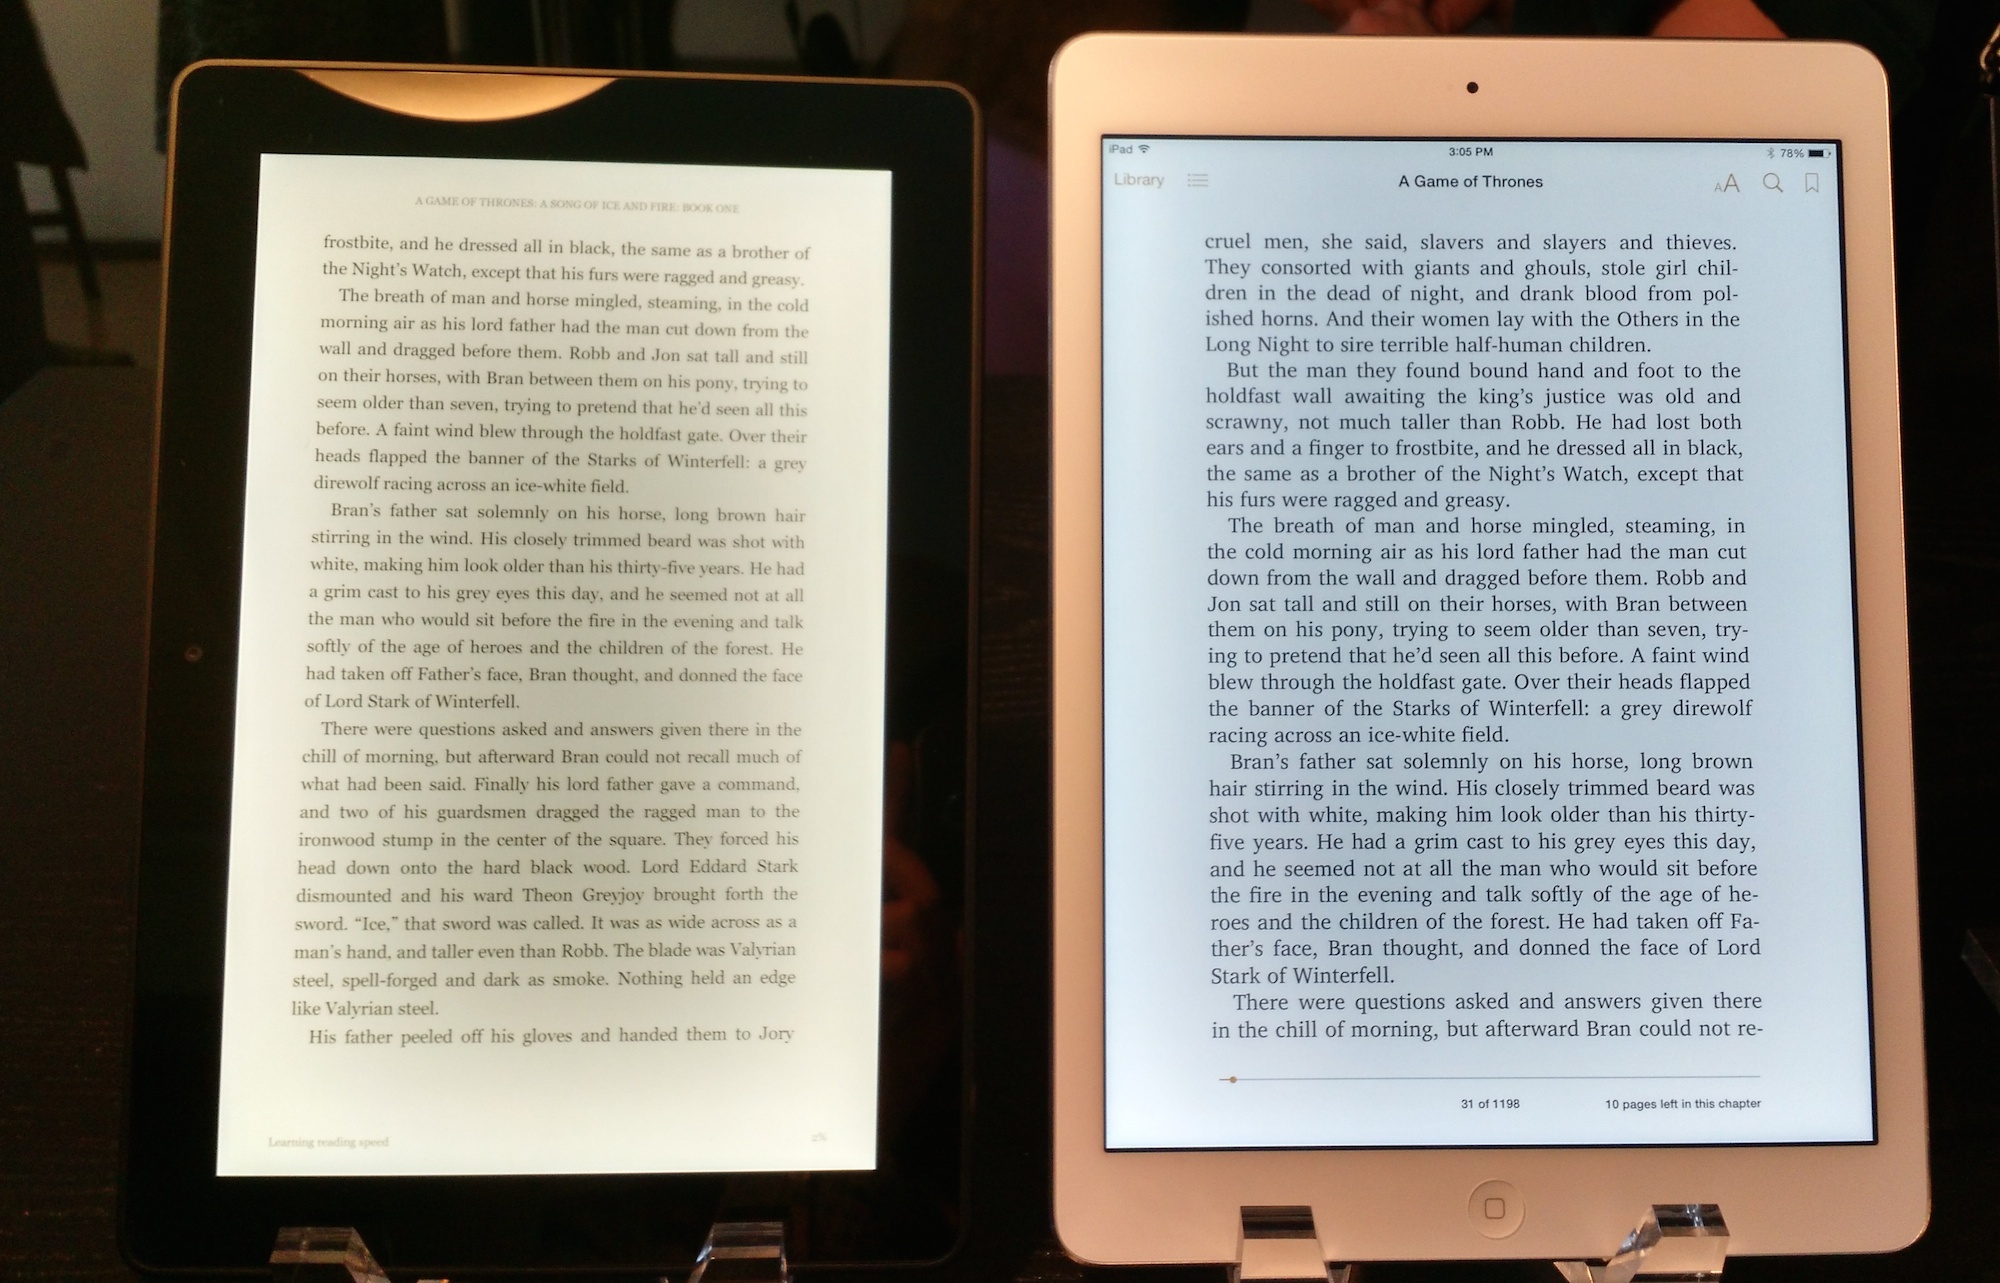 Unveils the Next Generation Kindle Paperwhite and New